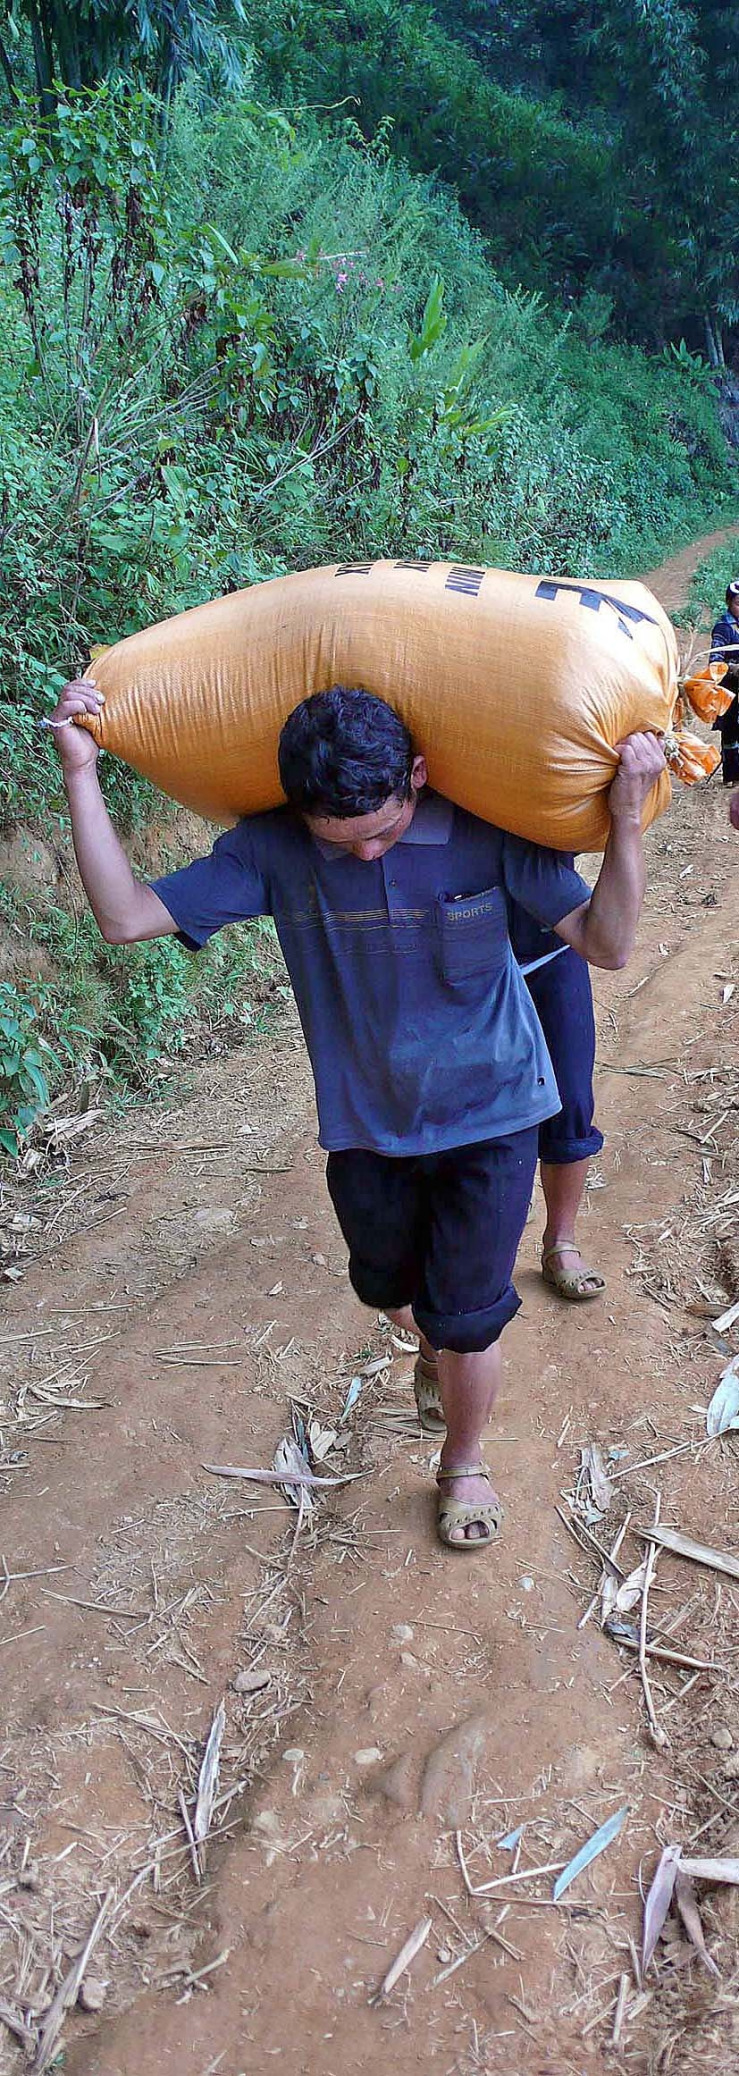 carrying rice bags uphill.jpg